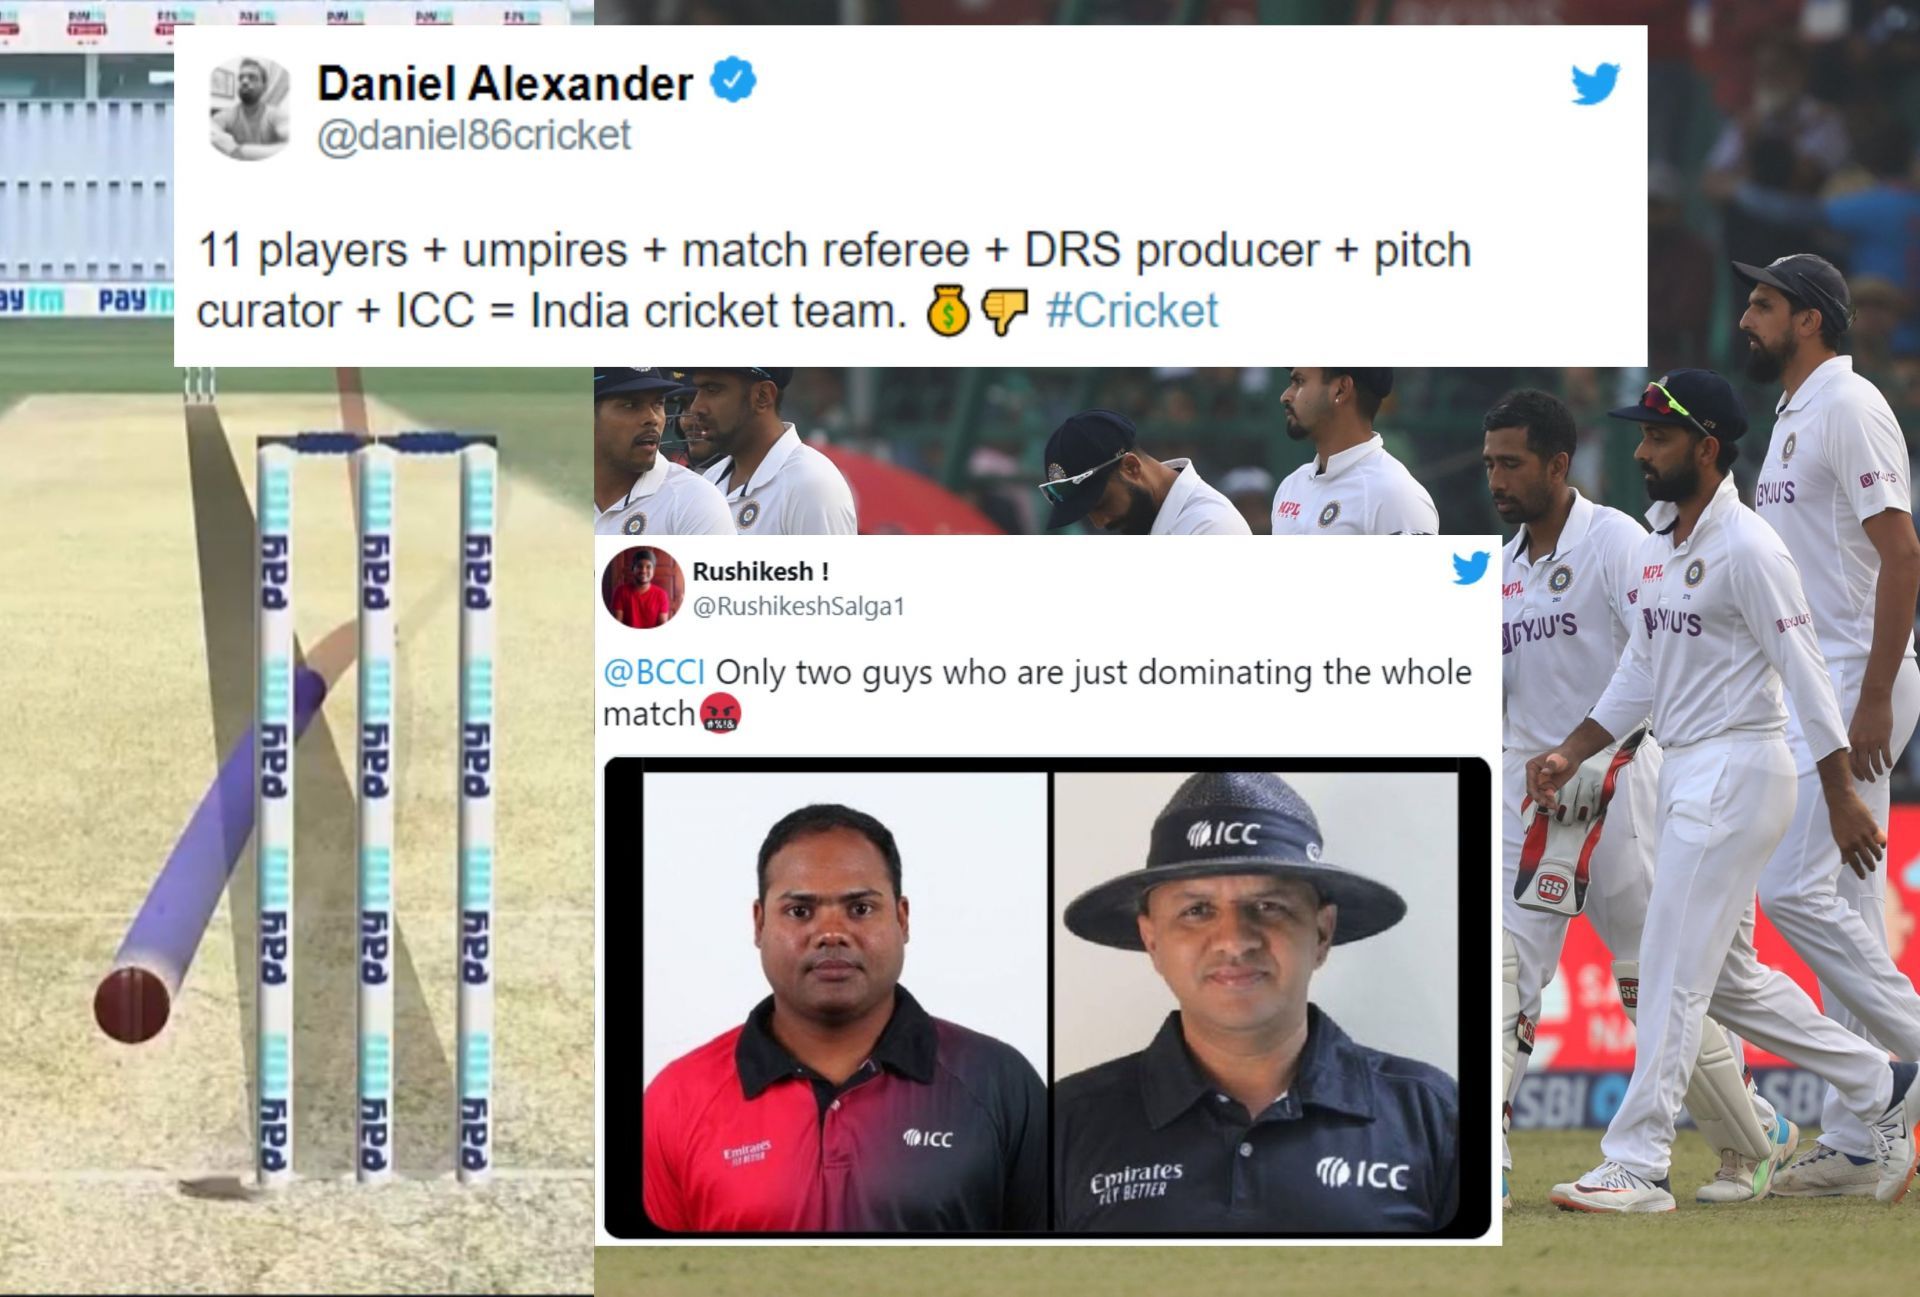 Fans react sarcastically after stumps on day 4 in the Kanpur Test between India and New Zealand